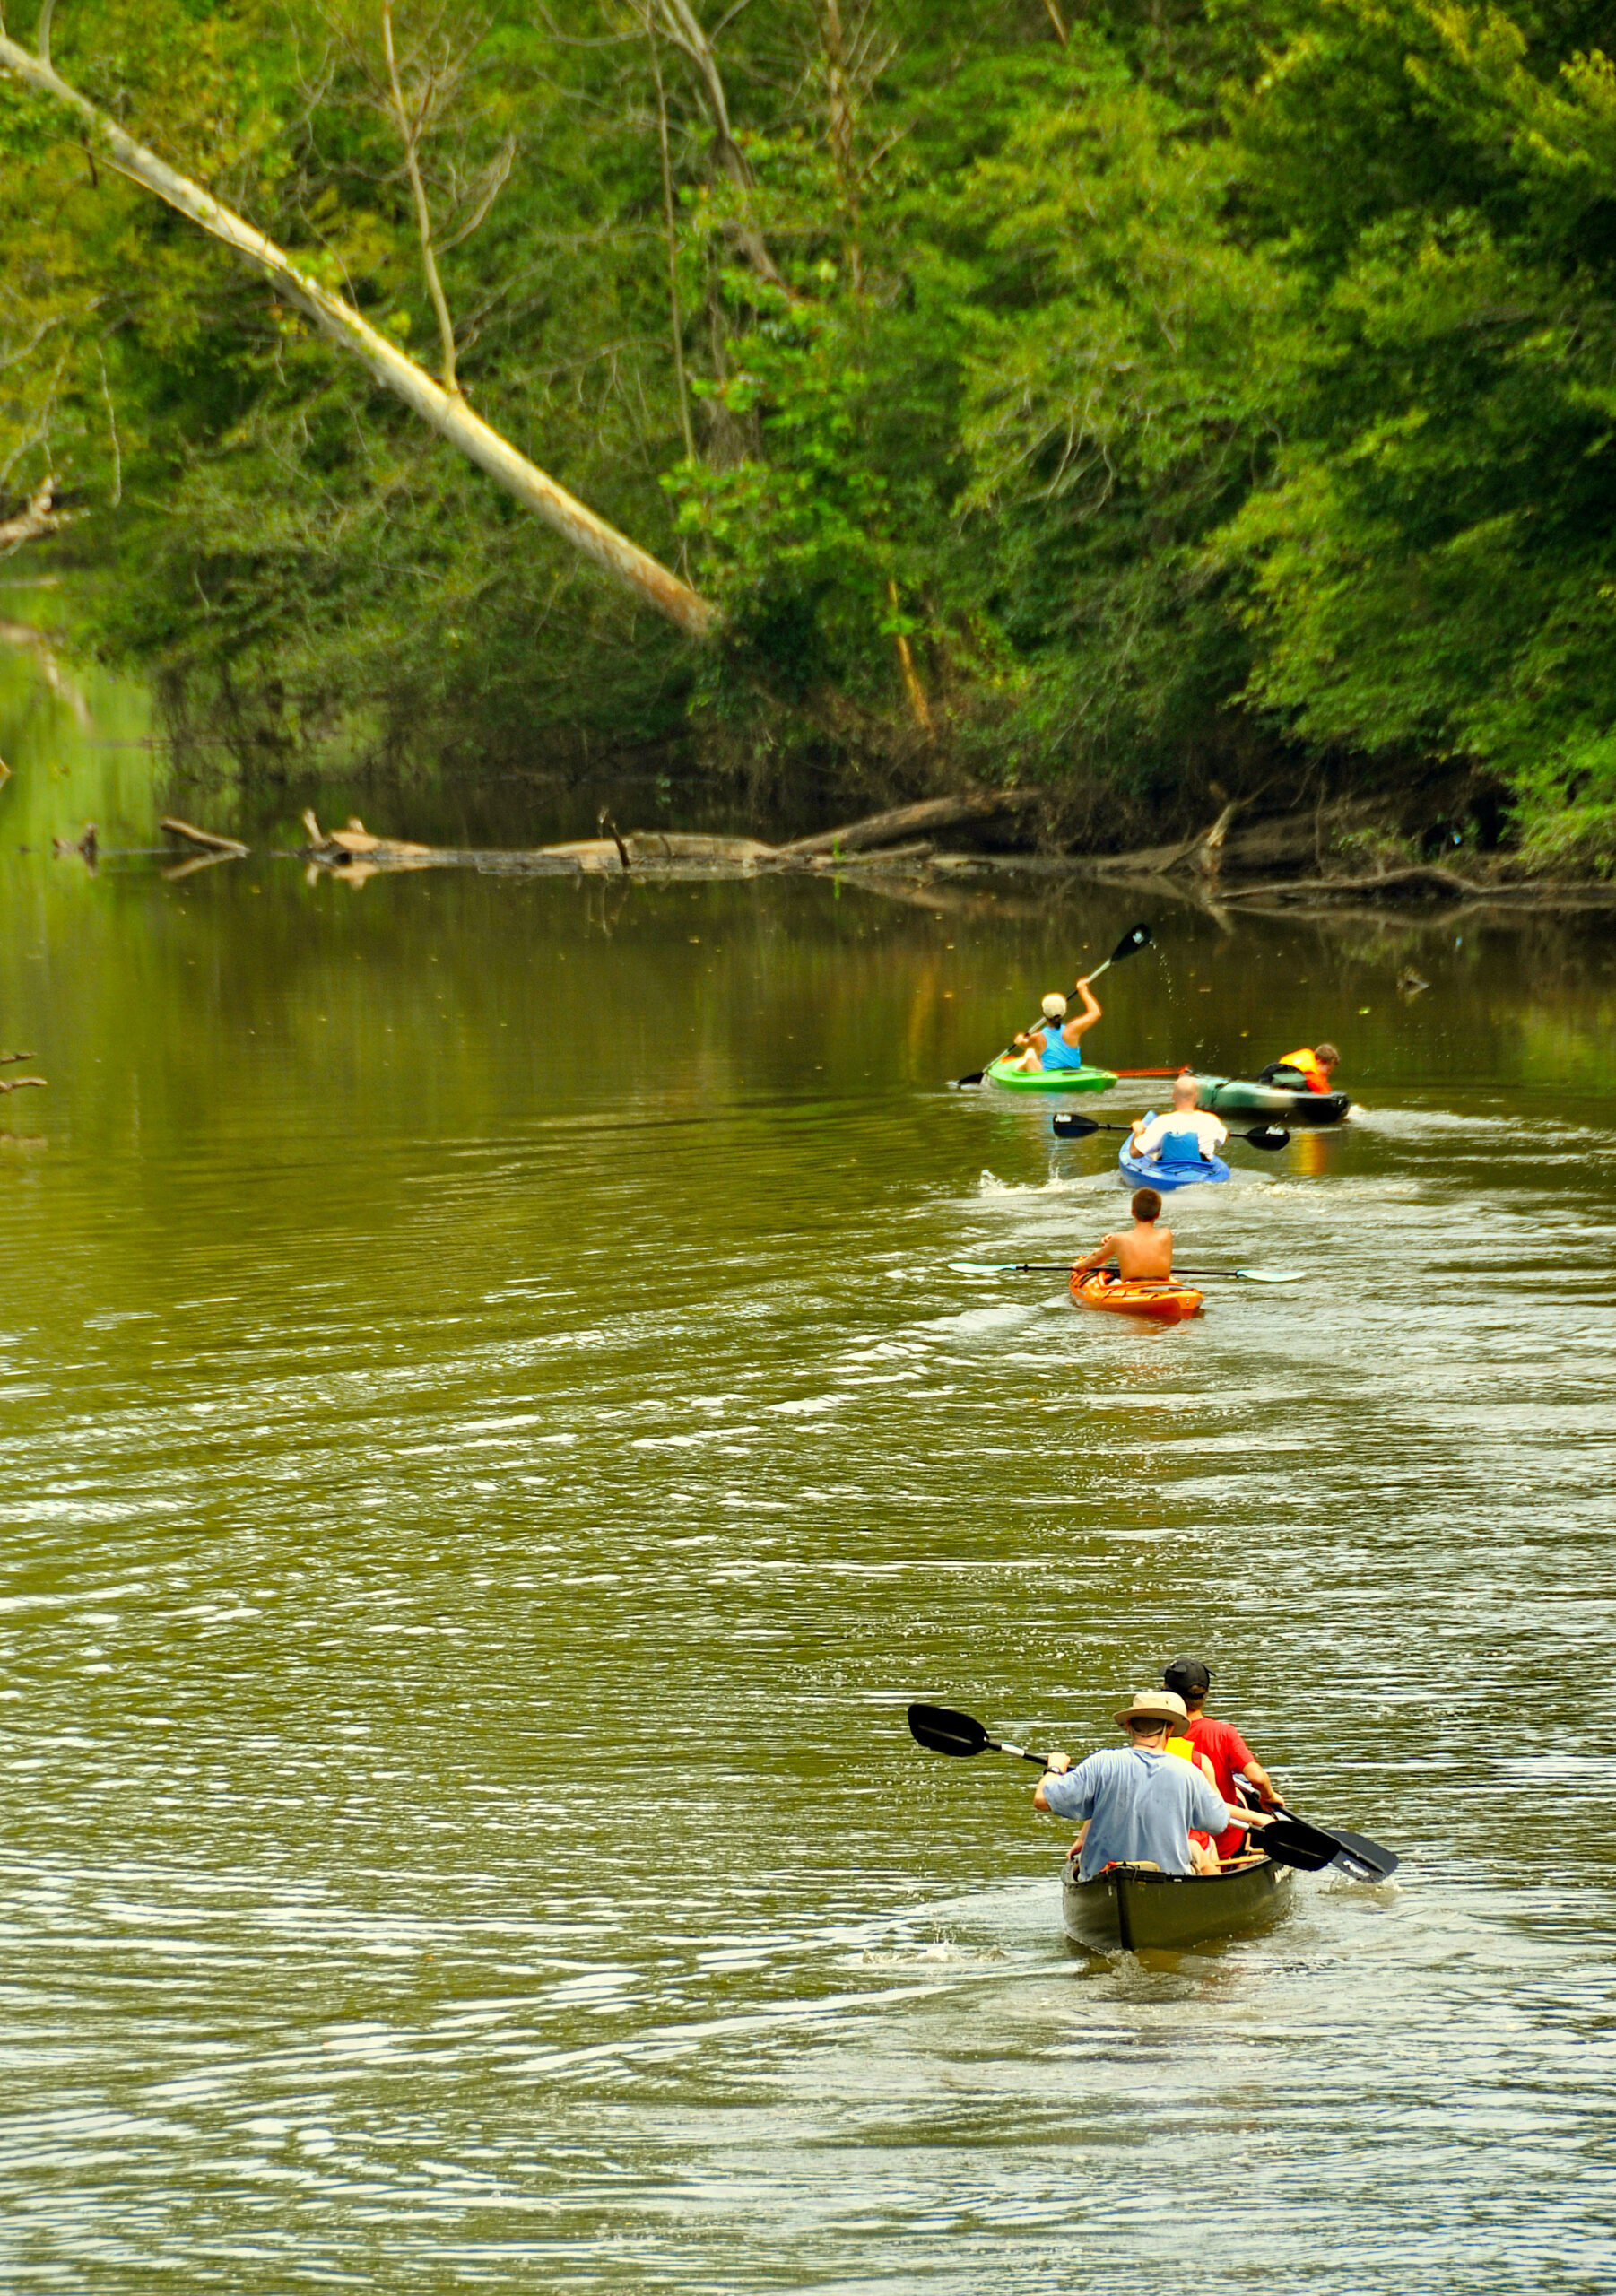 image: As more resistant bacteria spread in the Neuse River (here) or in other surface waters, people face higher risk of exposure, even through recreational activities. Credit (lead photo and this photo): James Willamor/CC-BY-SA-2.0.